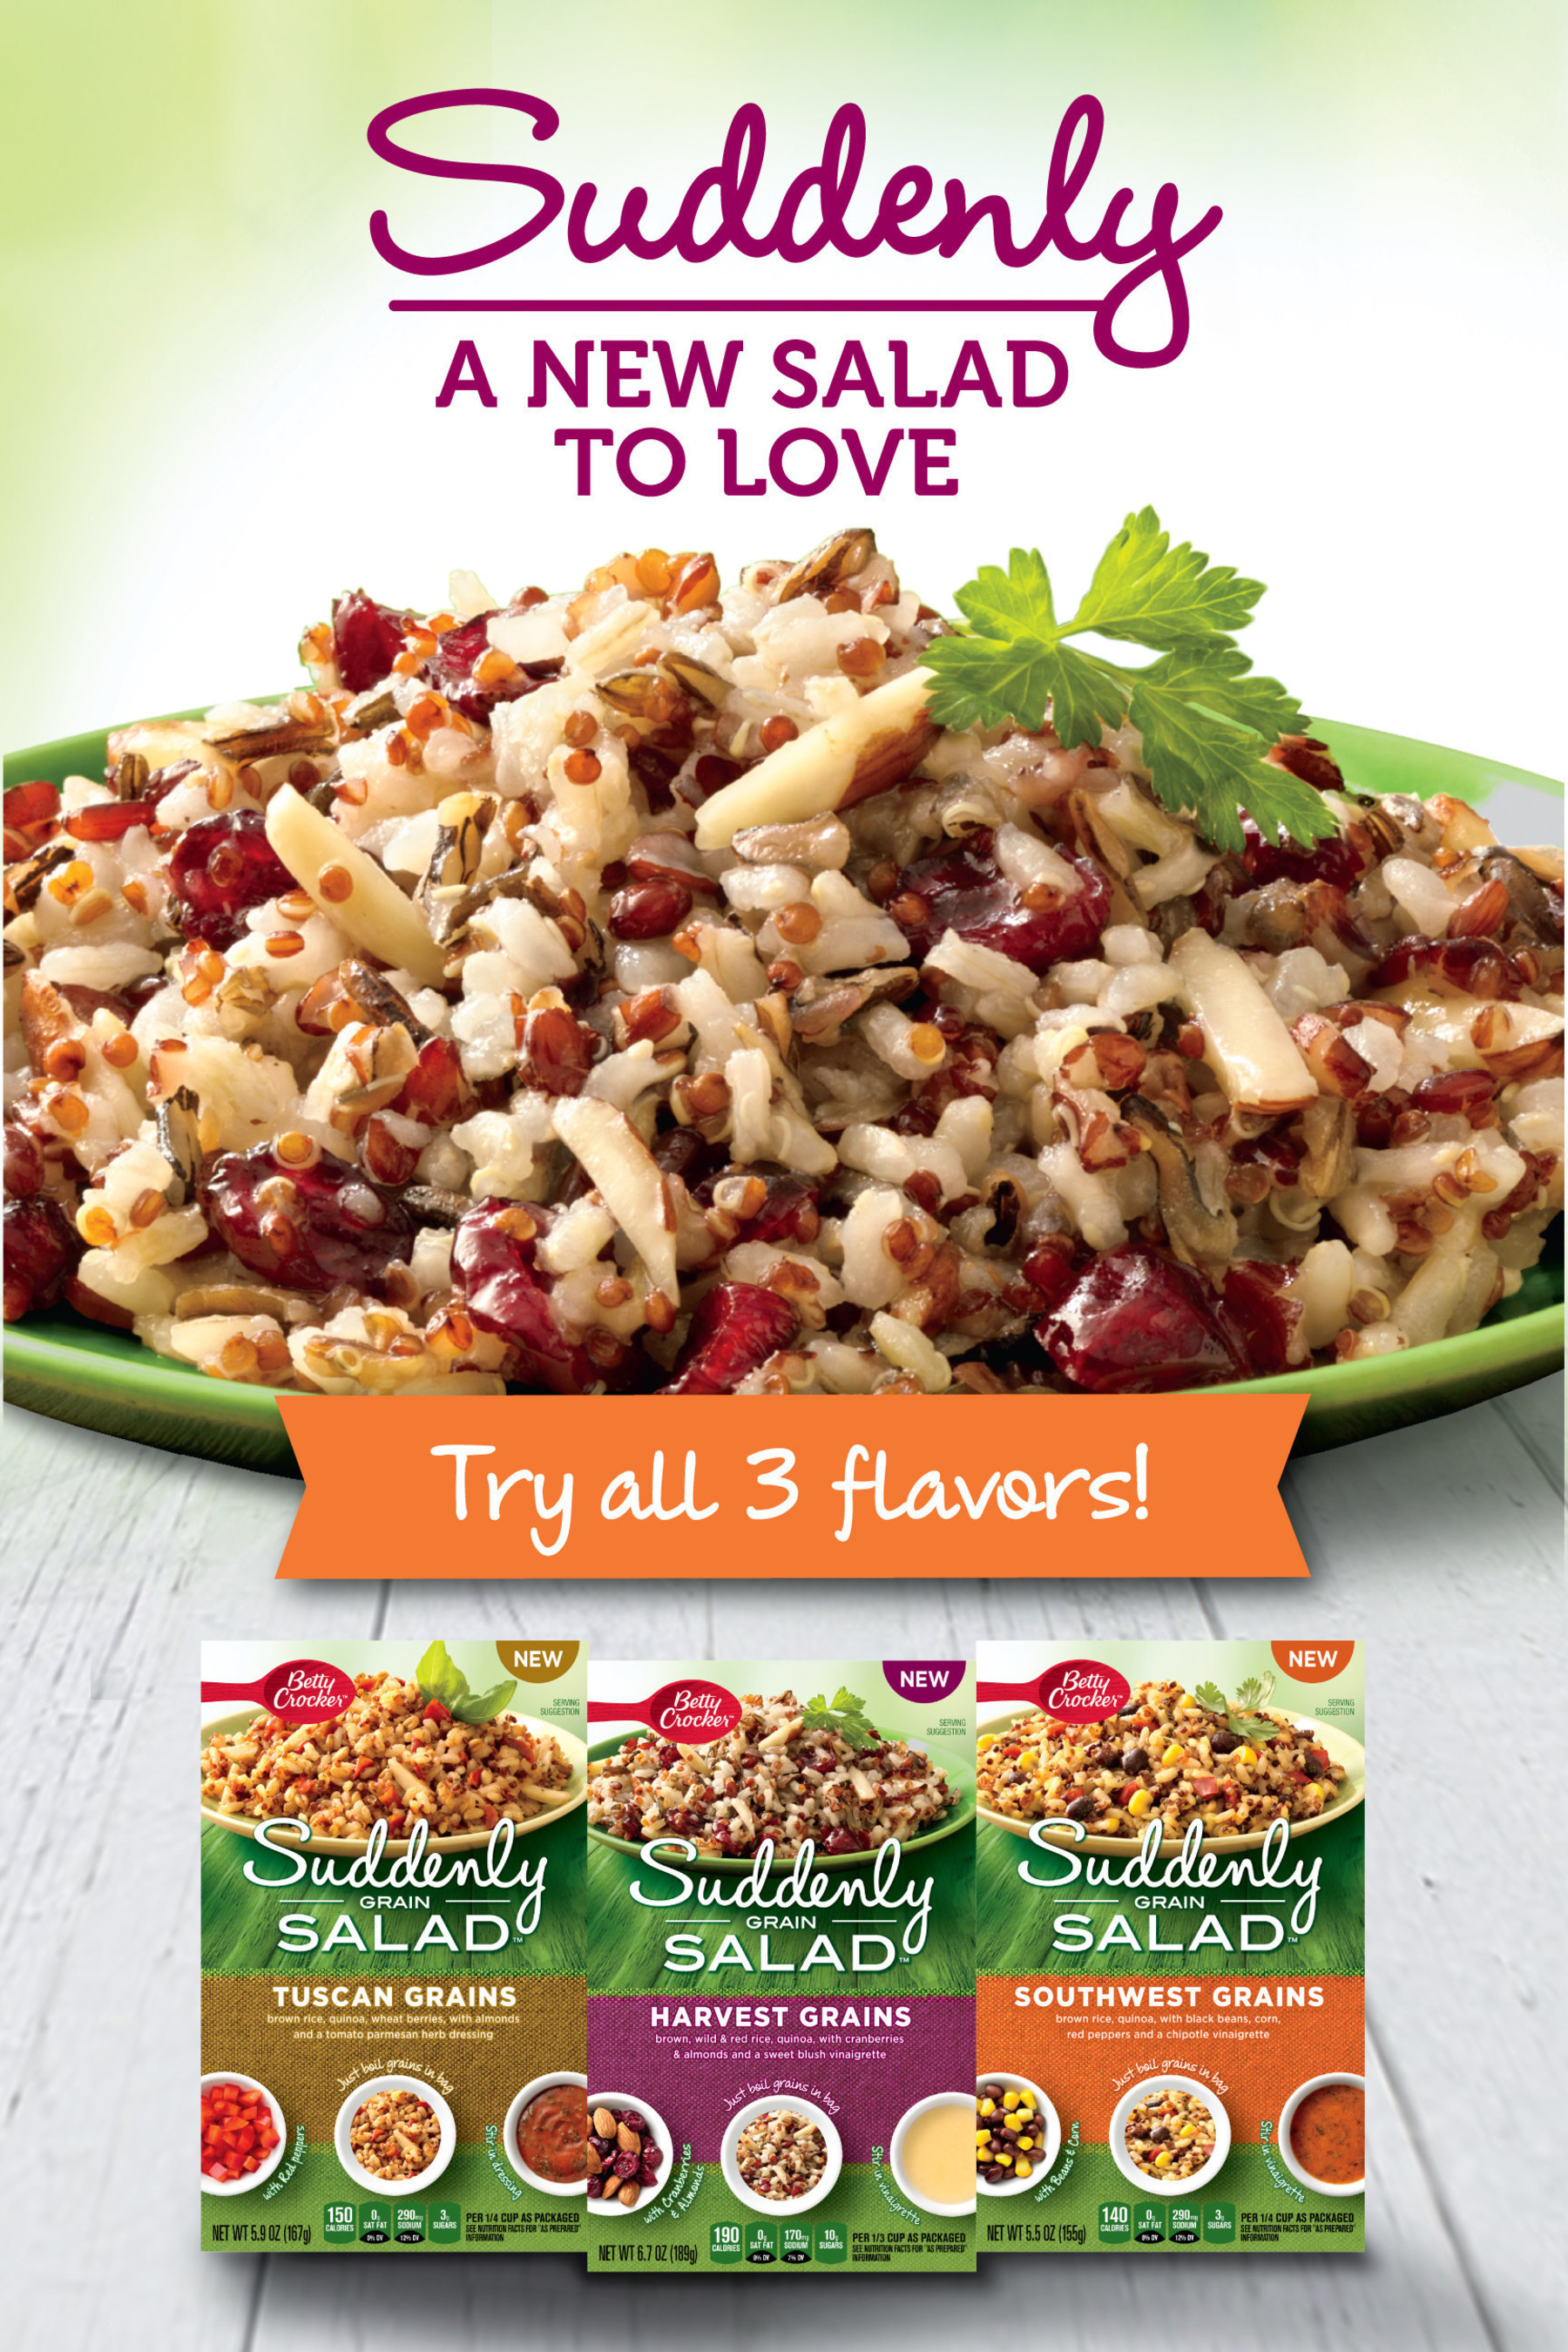 New Suddenly Grain Salad™ mixes hit the grain aisle with a completely new take on grains in a salad. Now consumers can get more whole grains into their everyday diets. Suddenly Grain Salad mixes are a wholesome blend of grains such as brown rice, wild rice, wheat berries and quinoa, paired with flavorful herbs and spices in a boil-in-bag format for convenient prep. Dried fruit, vegetables and/or nut mix-ins along with a zesty-flavored dressing packet are included to create a blend of bold flavors and textures. (PRNewsFoto/Betty Crocker)